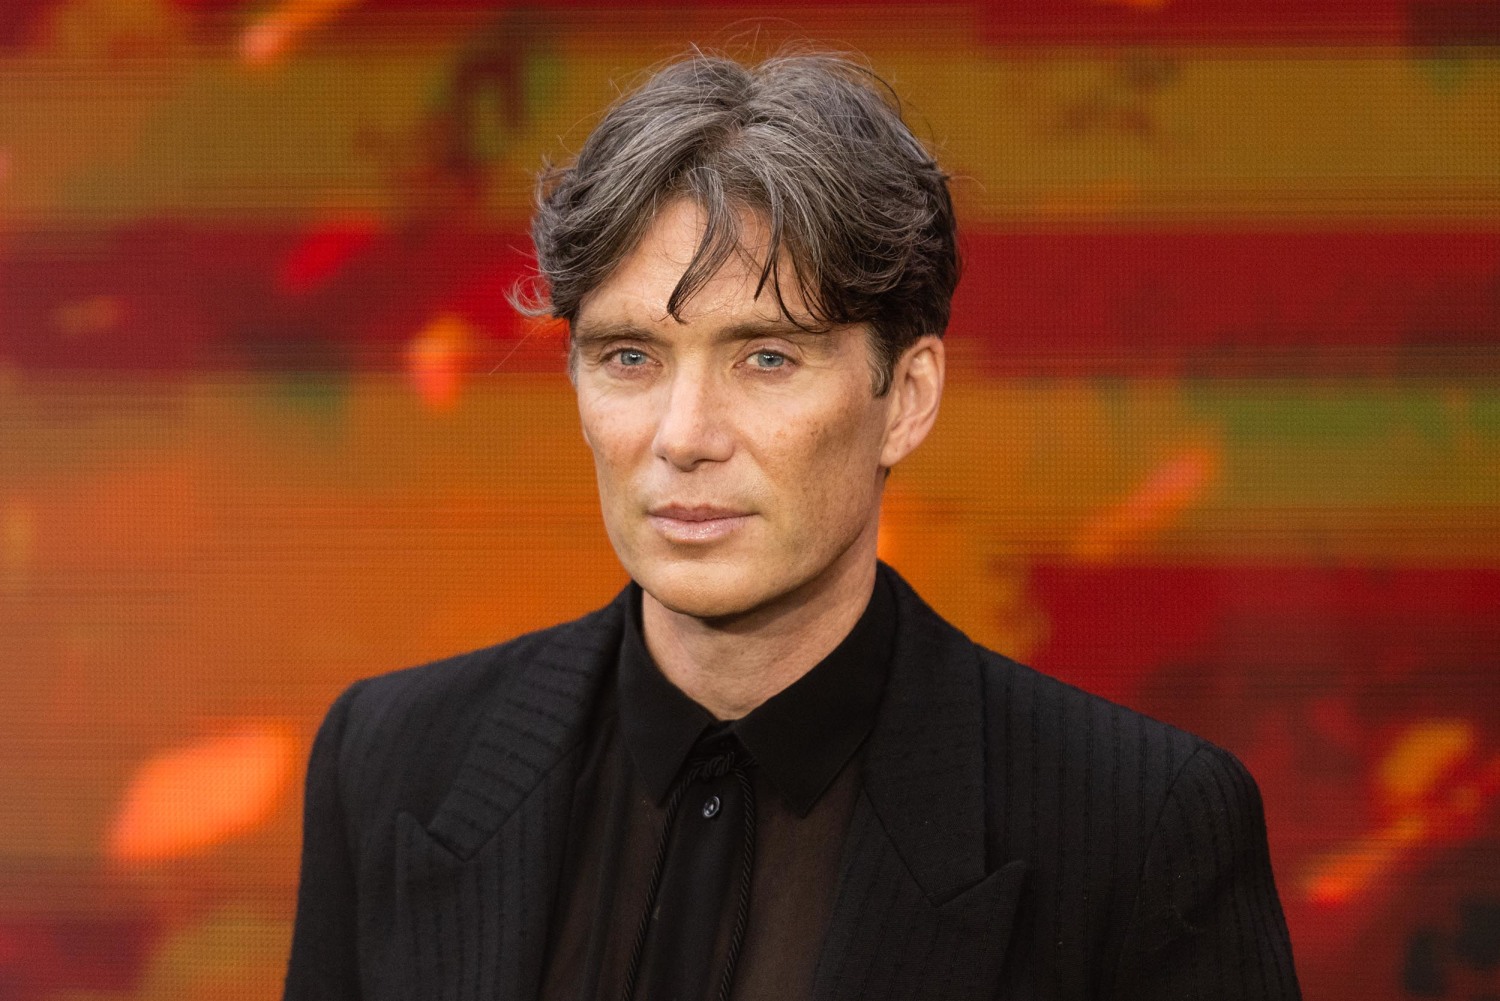 Cillian Murphy finds out his MLB lookalike is real (via Happy Sad Conf